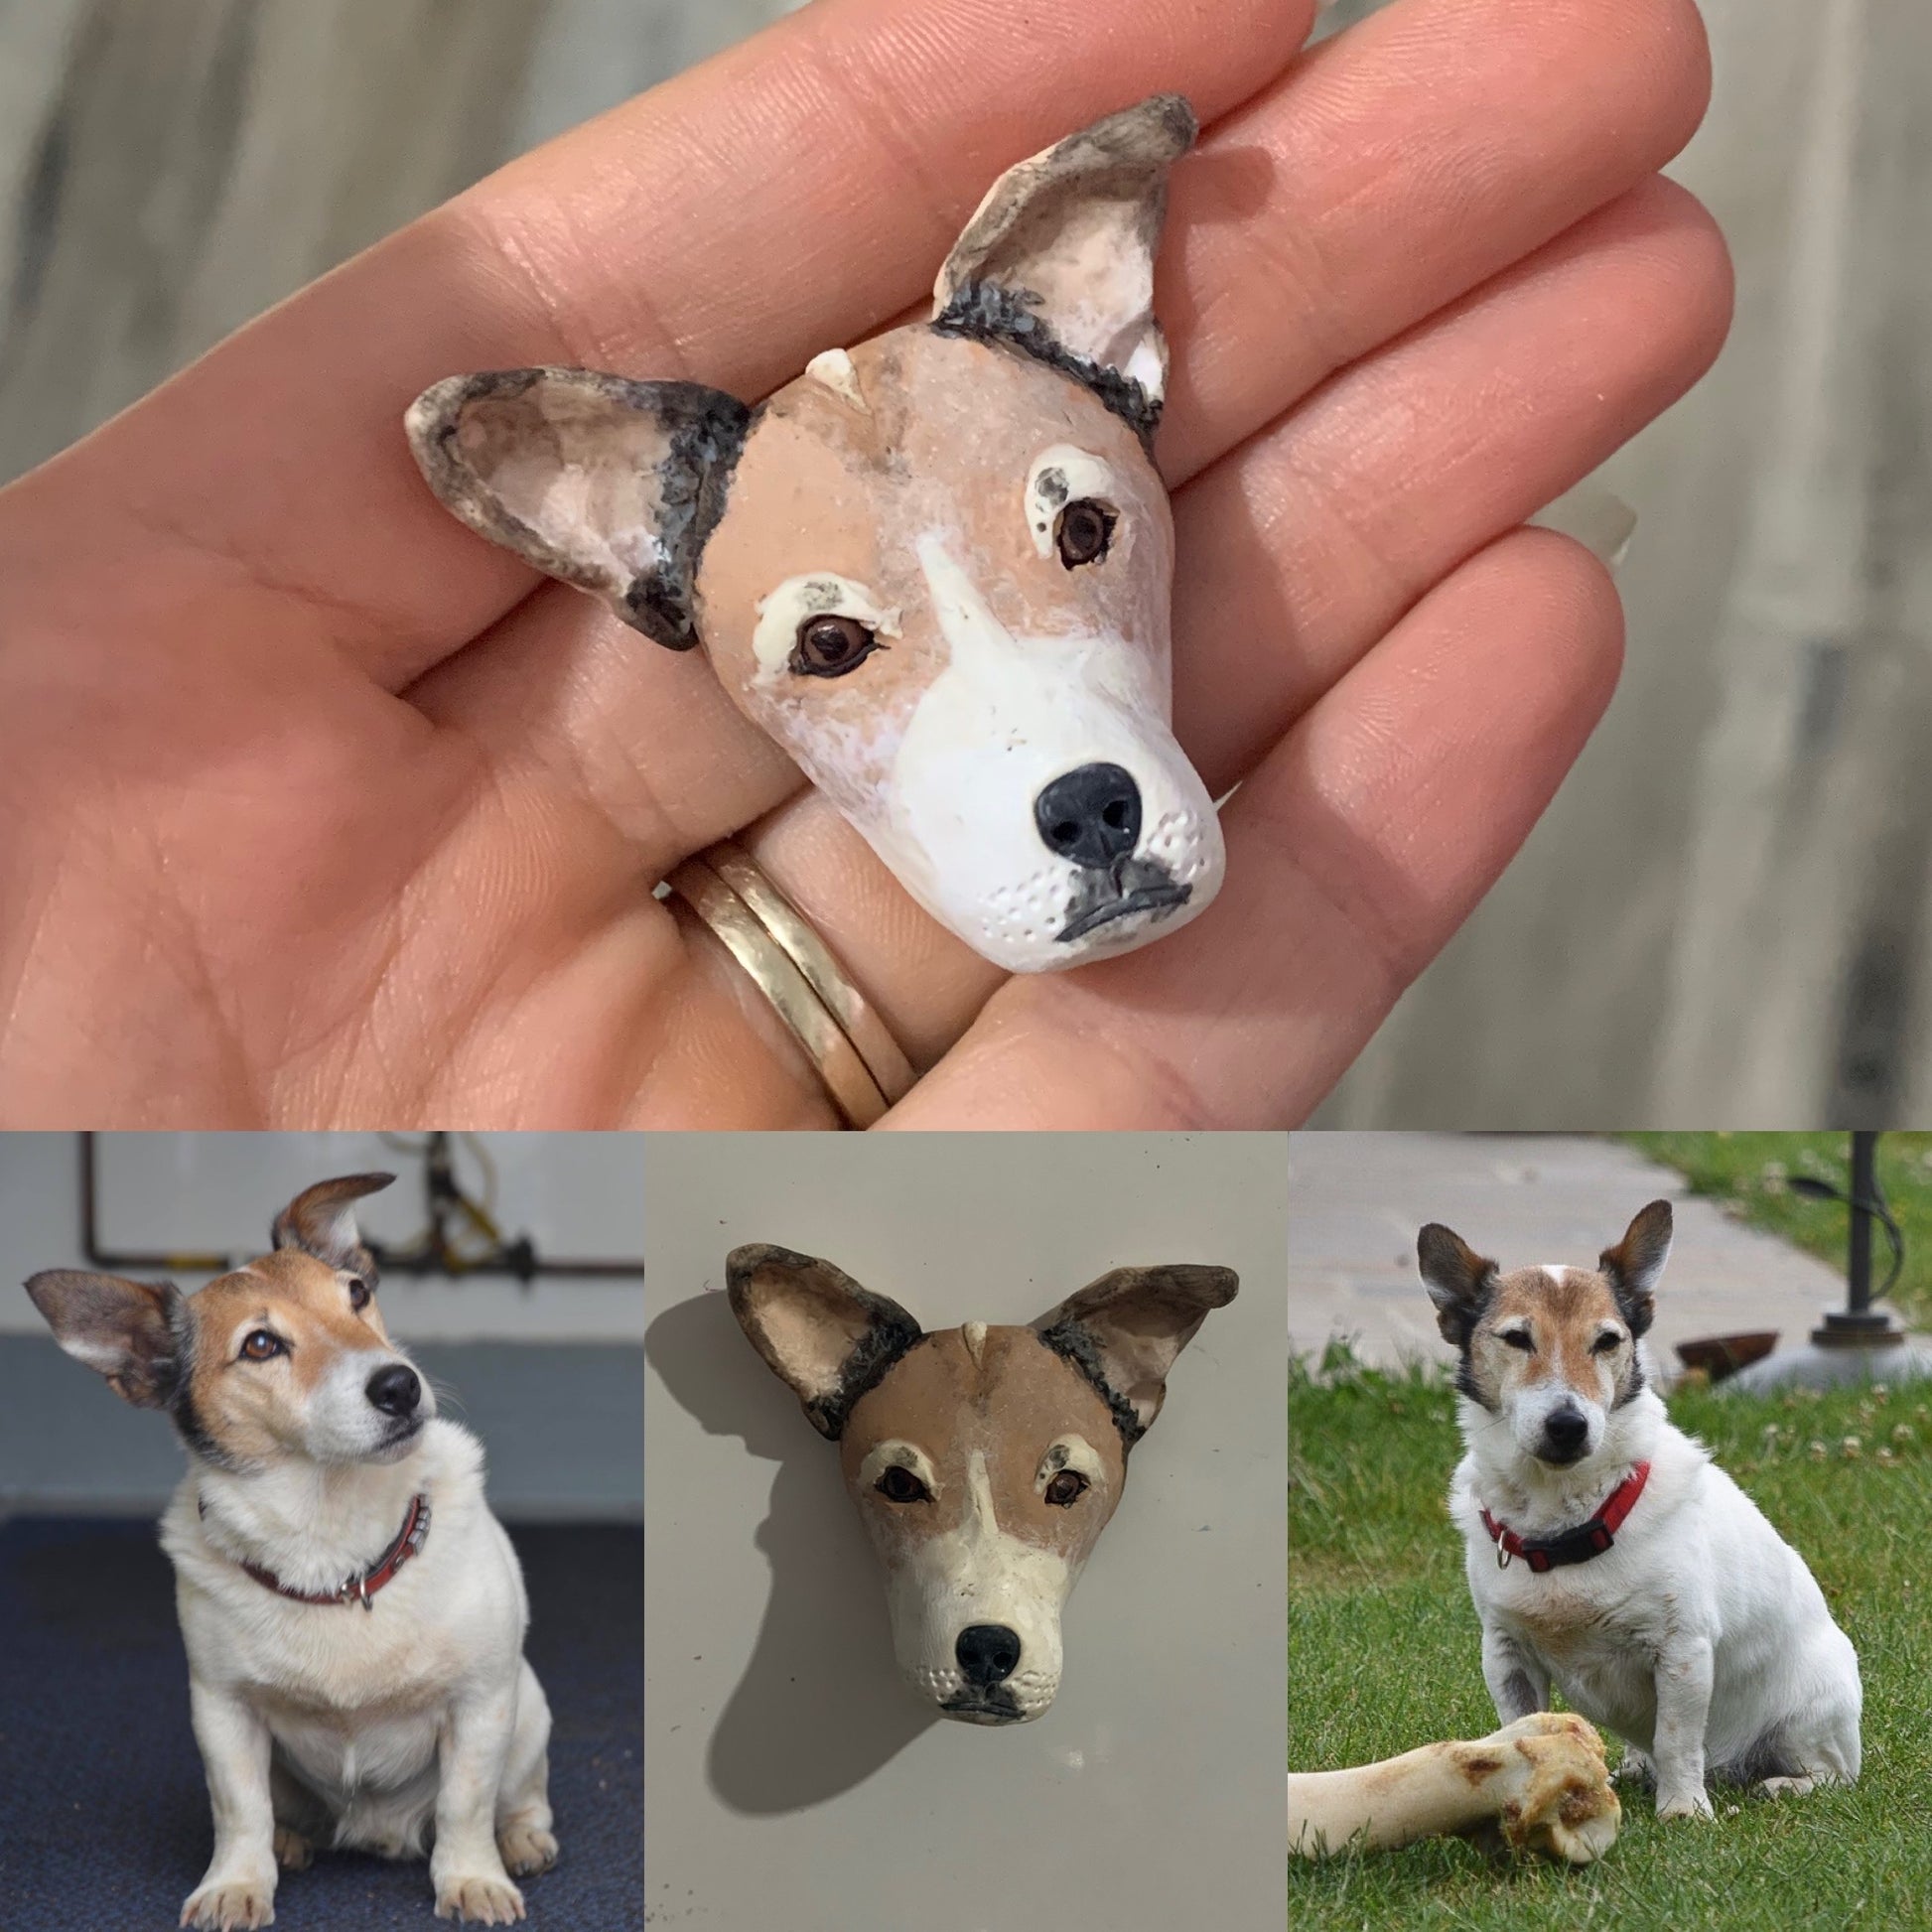 Handmade polymer clay pet memorial fridge magnet, made to look like a Jack Russell dog.